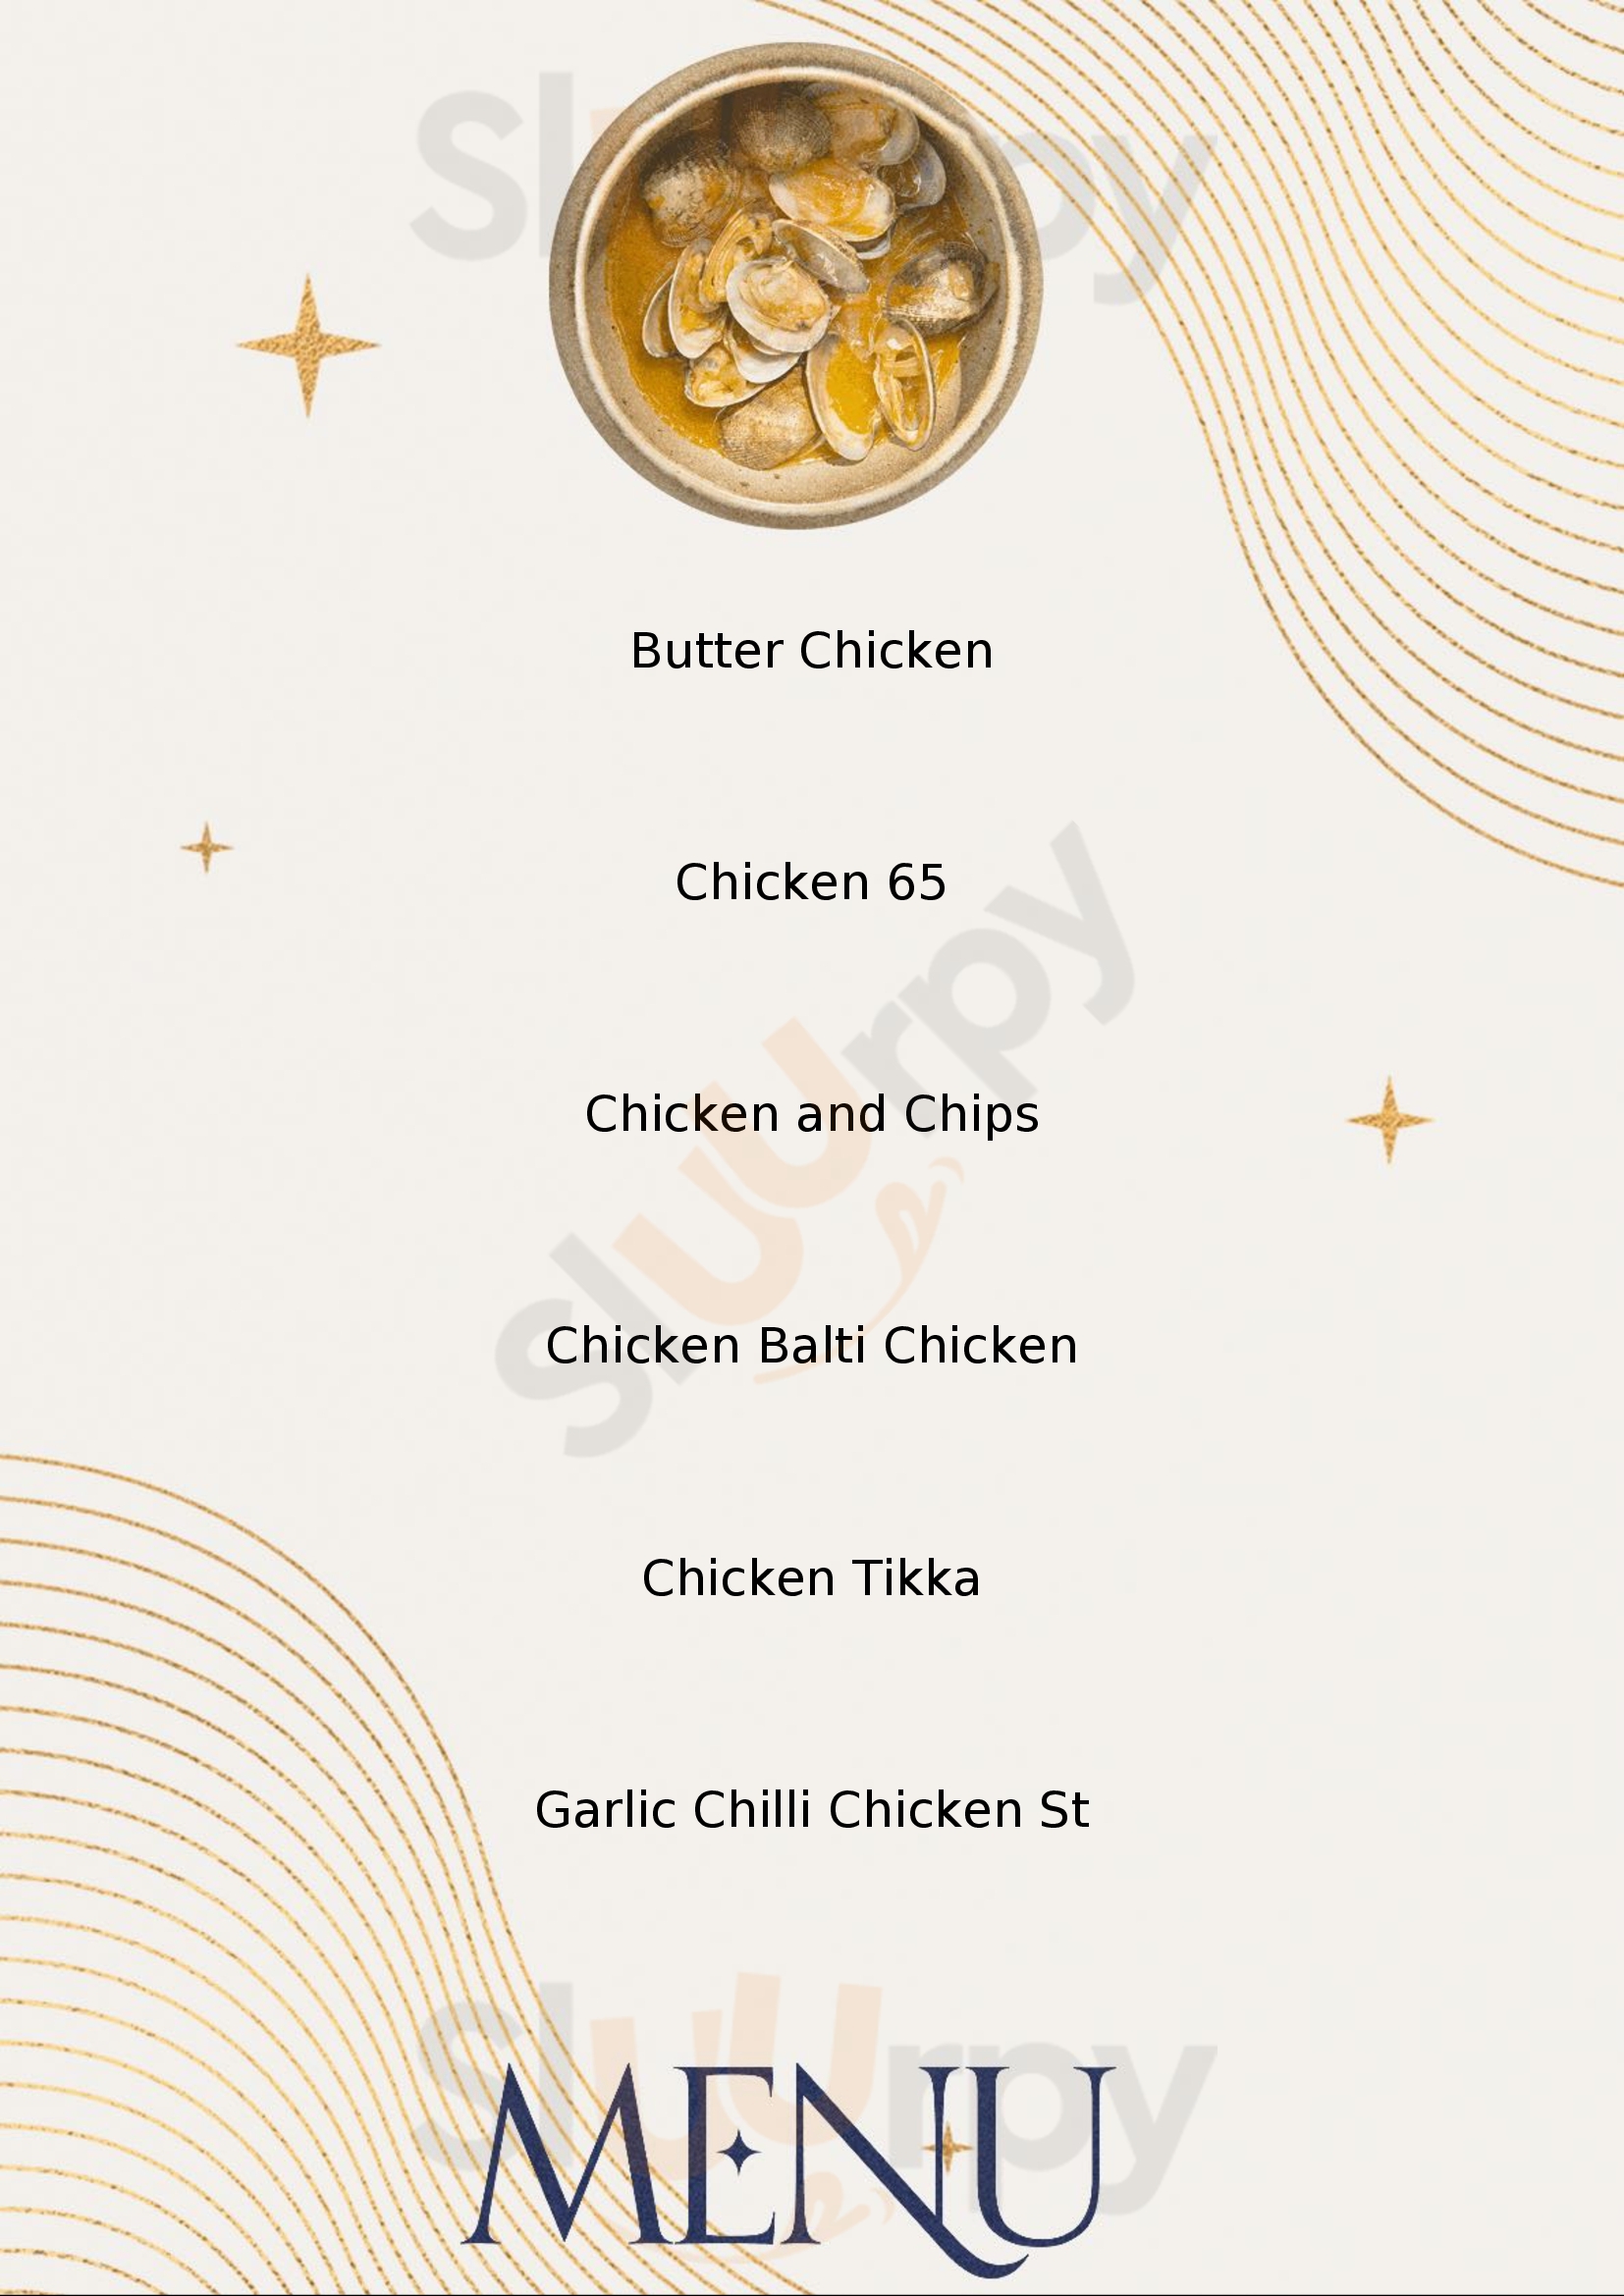 Herbs And Spice Restaurant & Take-away Atherstone Menu - 1